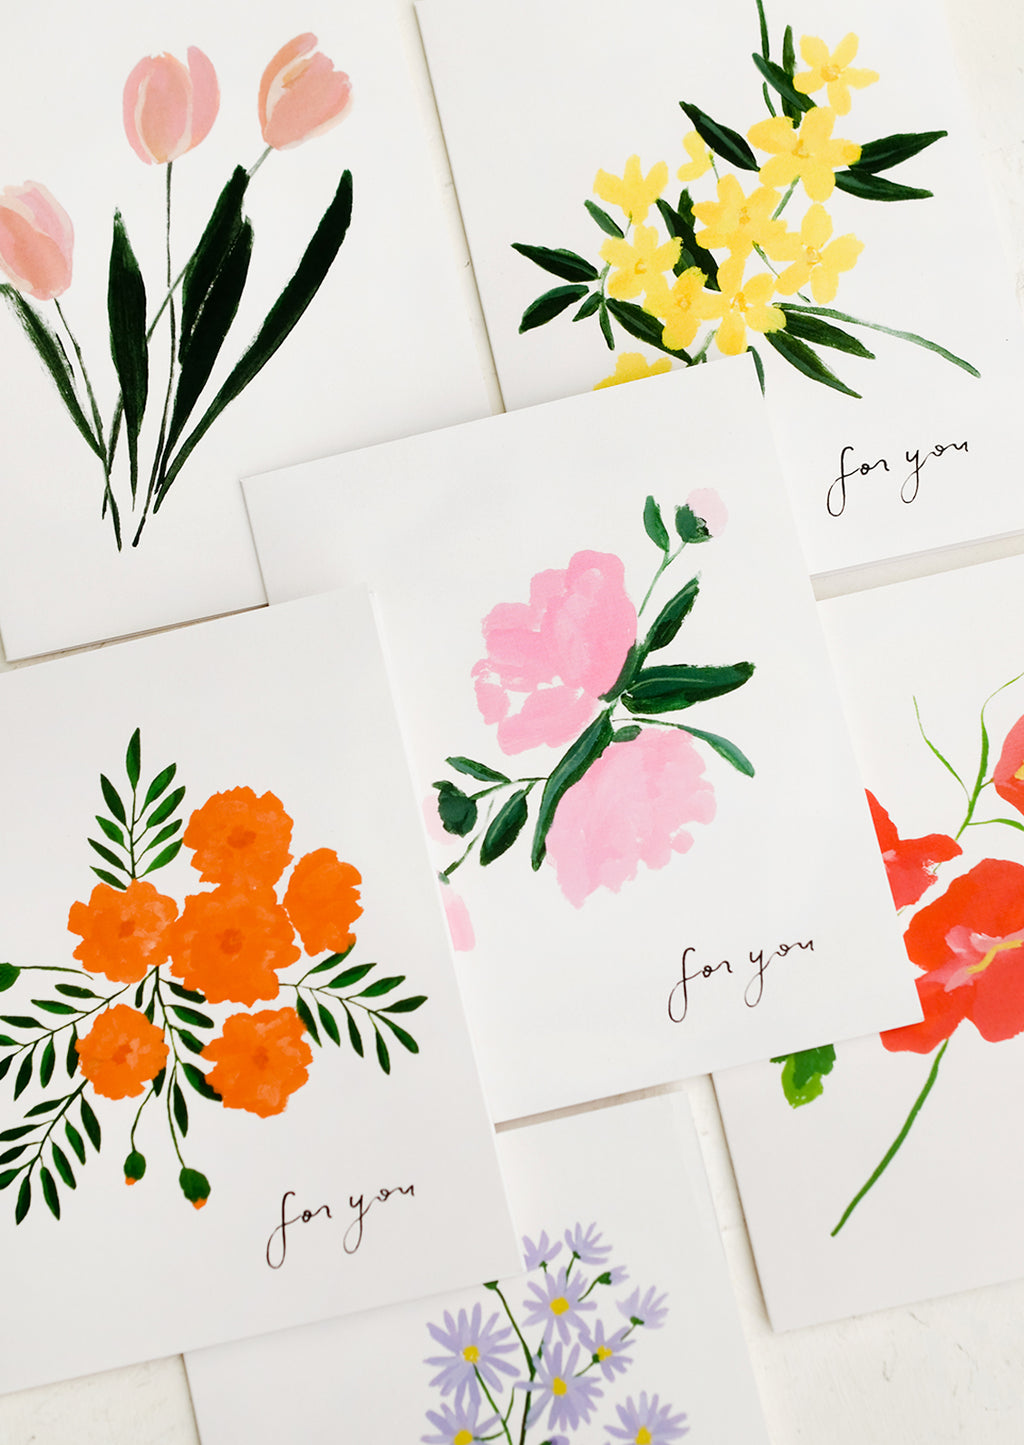 1: A set of white greeting cards in assorted floral prints with text at corner reading "for you".